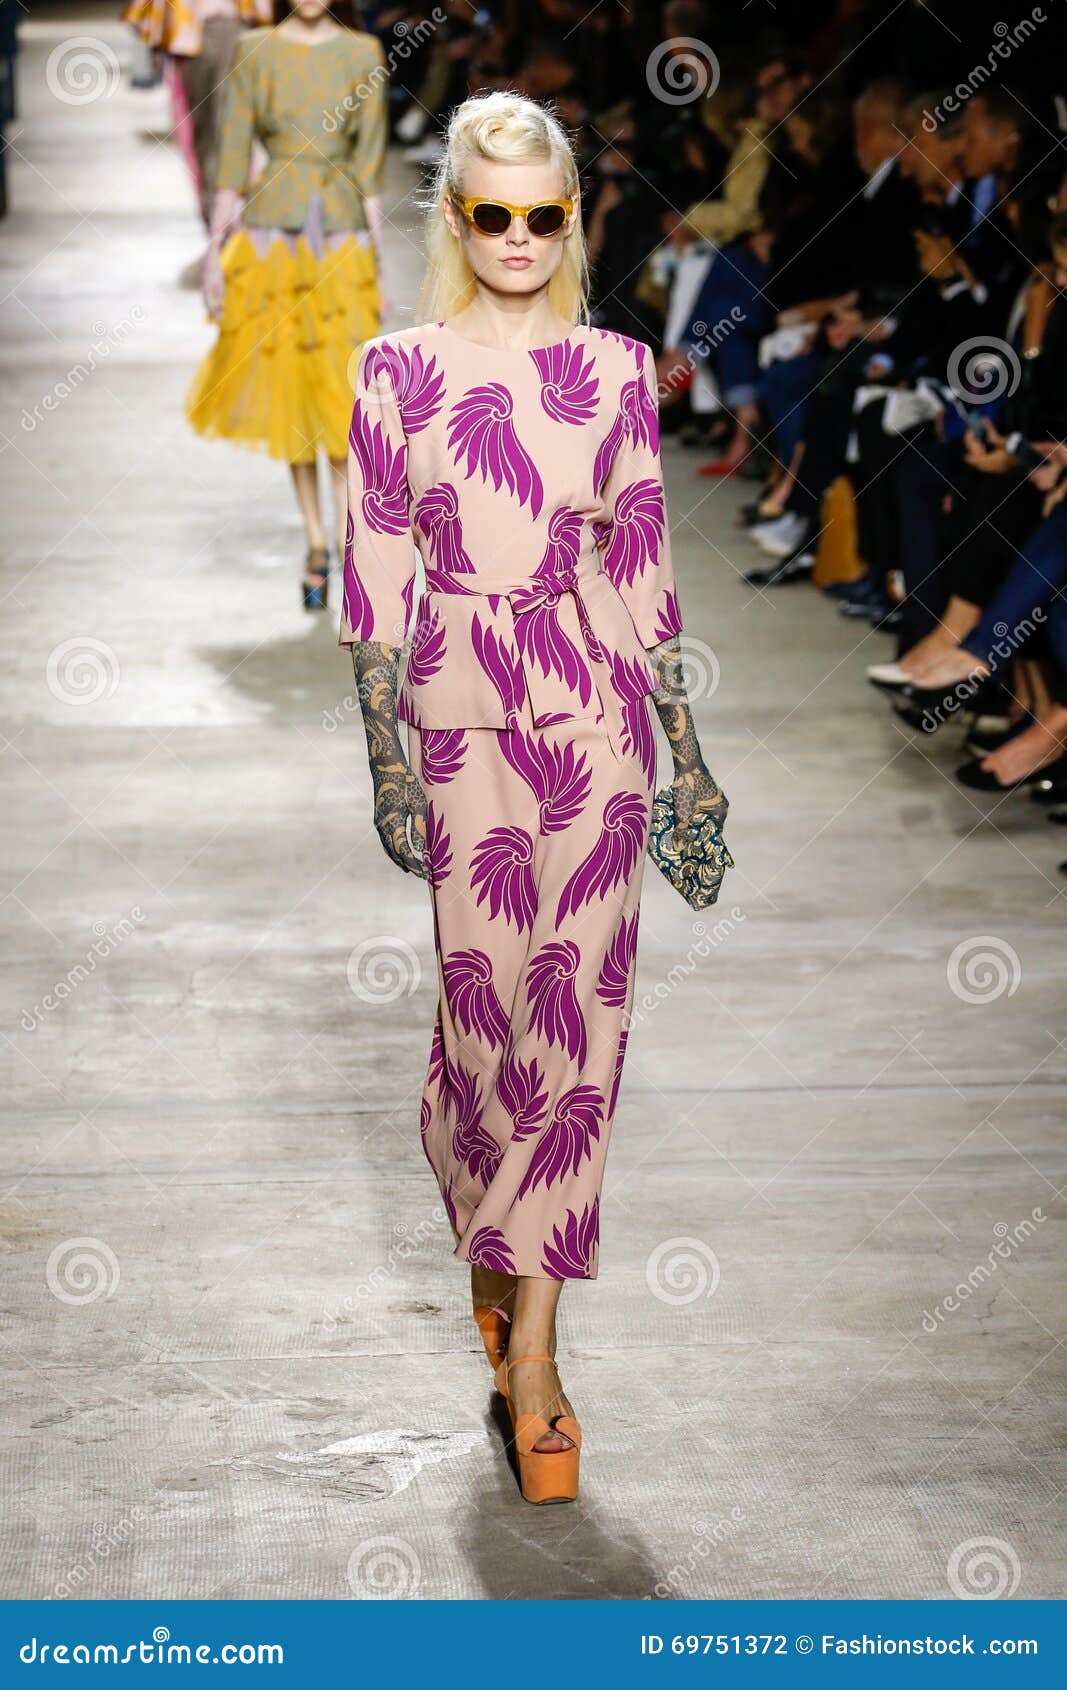 PARIS, FRANCE - SEPTEMBER 30: Hanne Gaby Odiele walks the runway during the Dries Van Noten show as part of the Paris Fashion Week Womenswear Spring/Summer 2016 on September 30, 2015 in Paris, France.